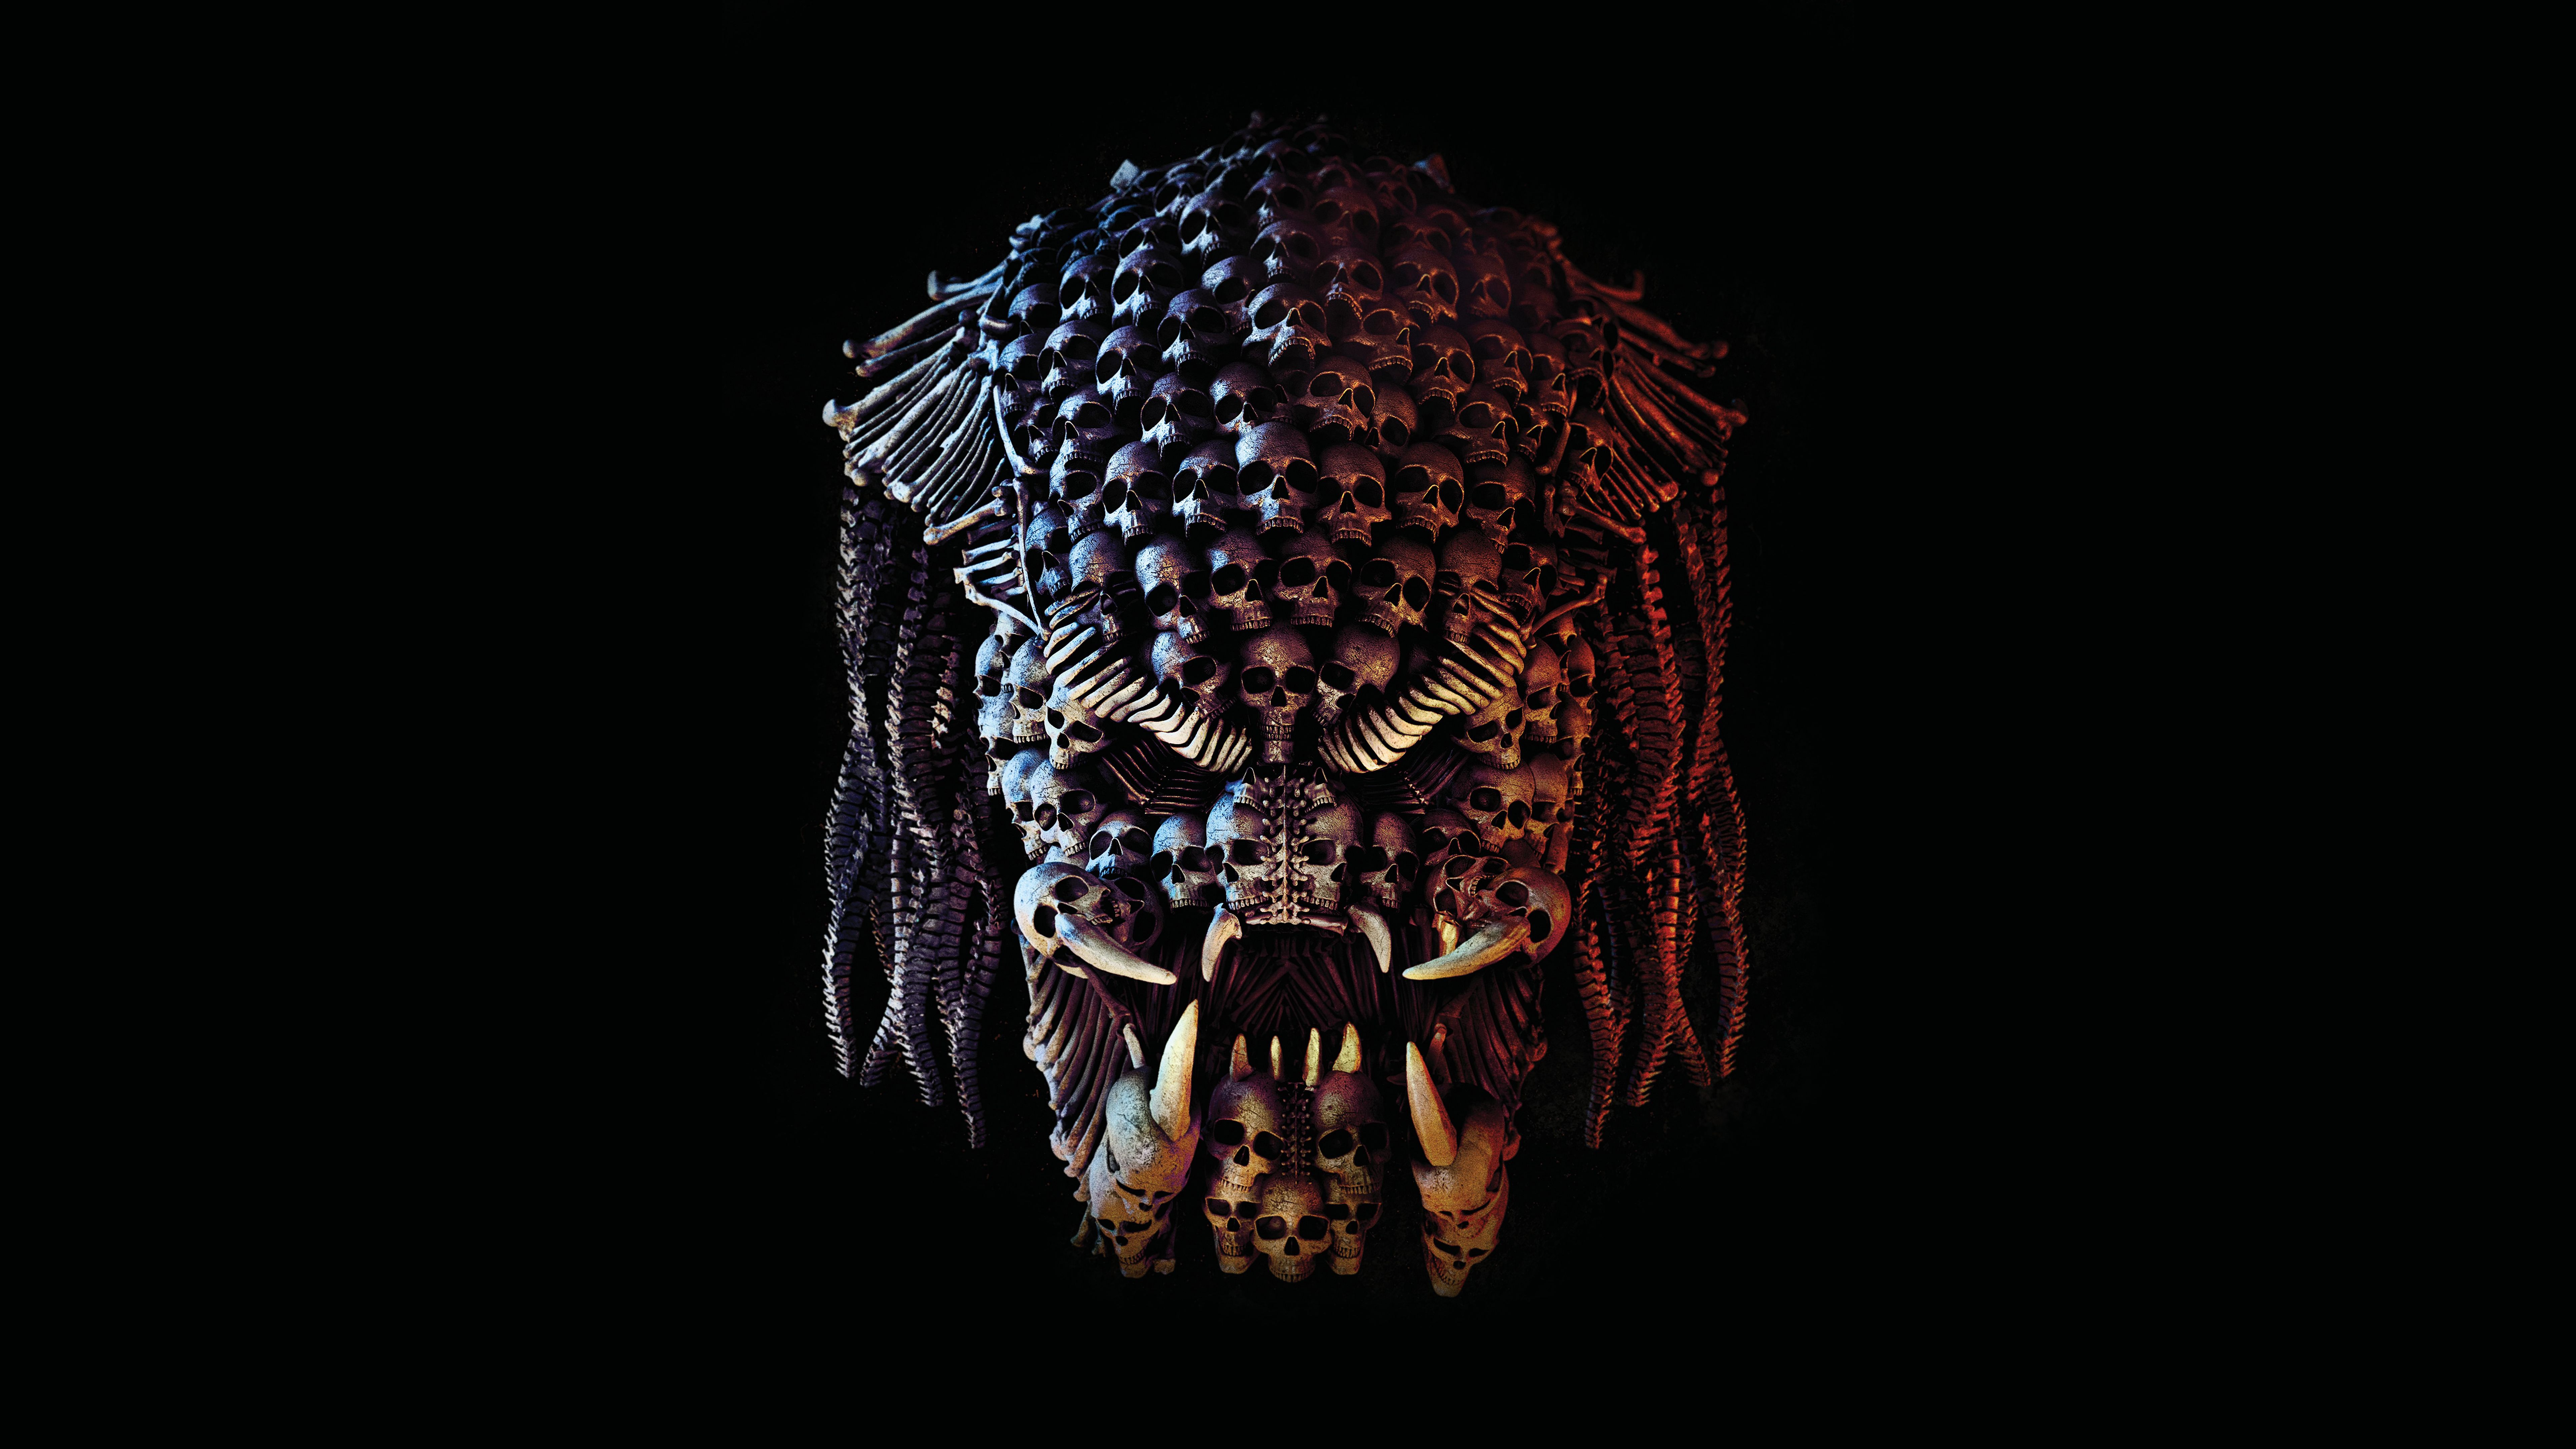 Wallpaper The Predator, 4K, 8K, Movies,. Wallpaper for iPhone, Android, Mobile and Desktop